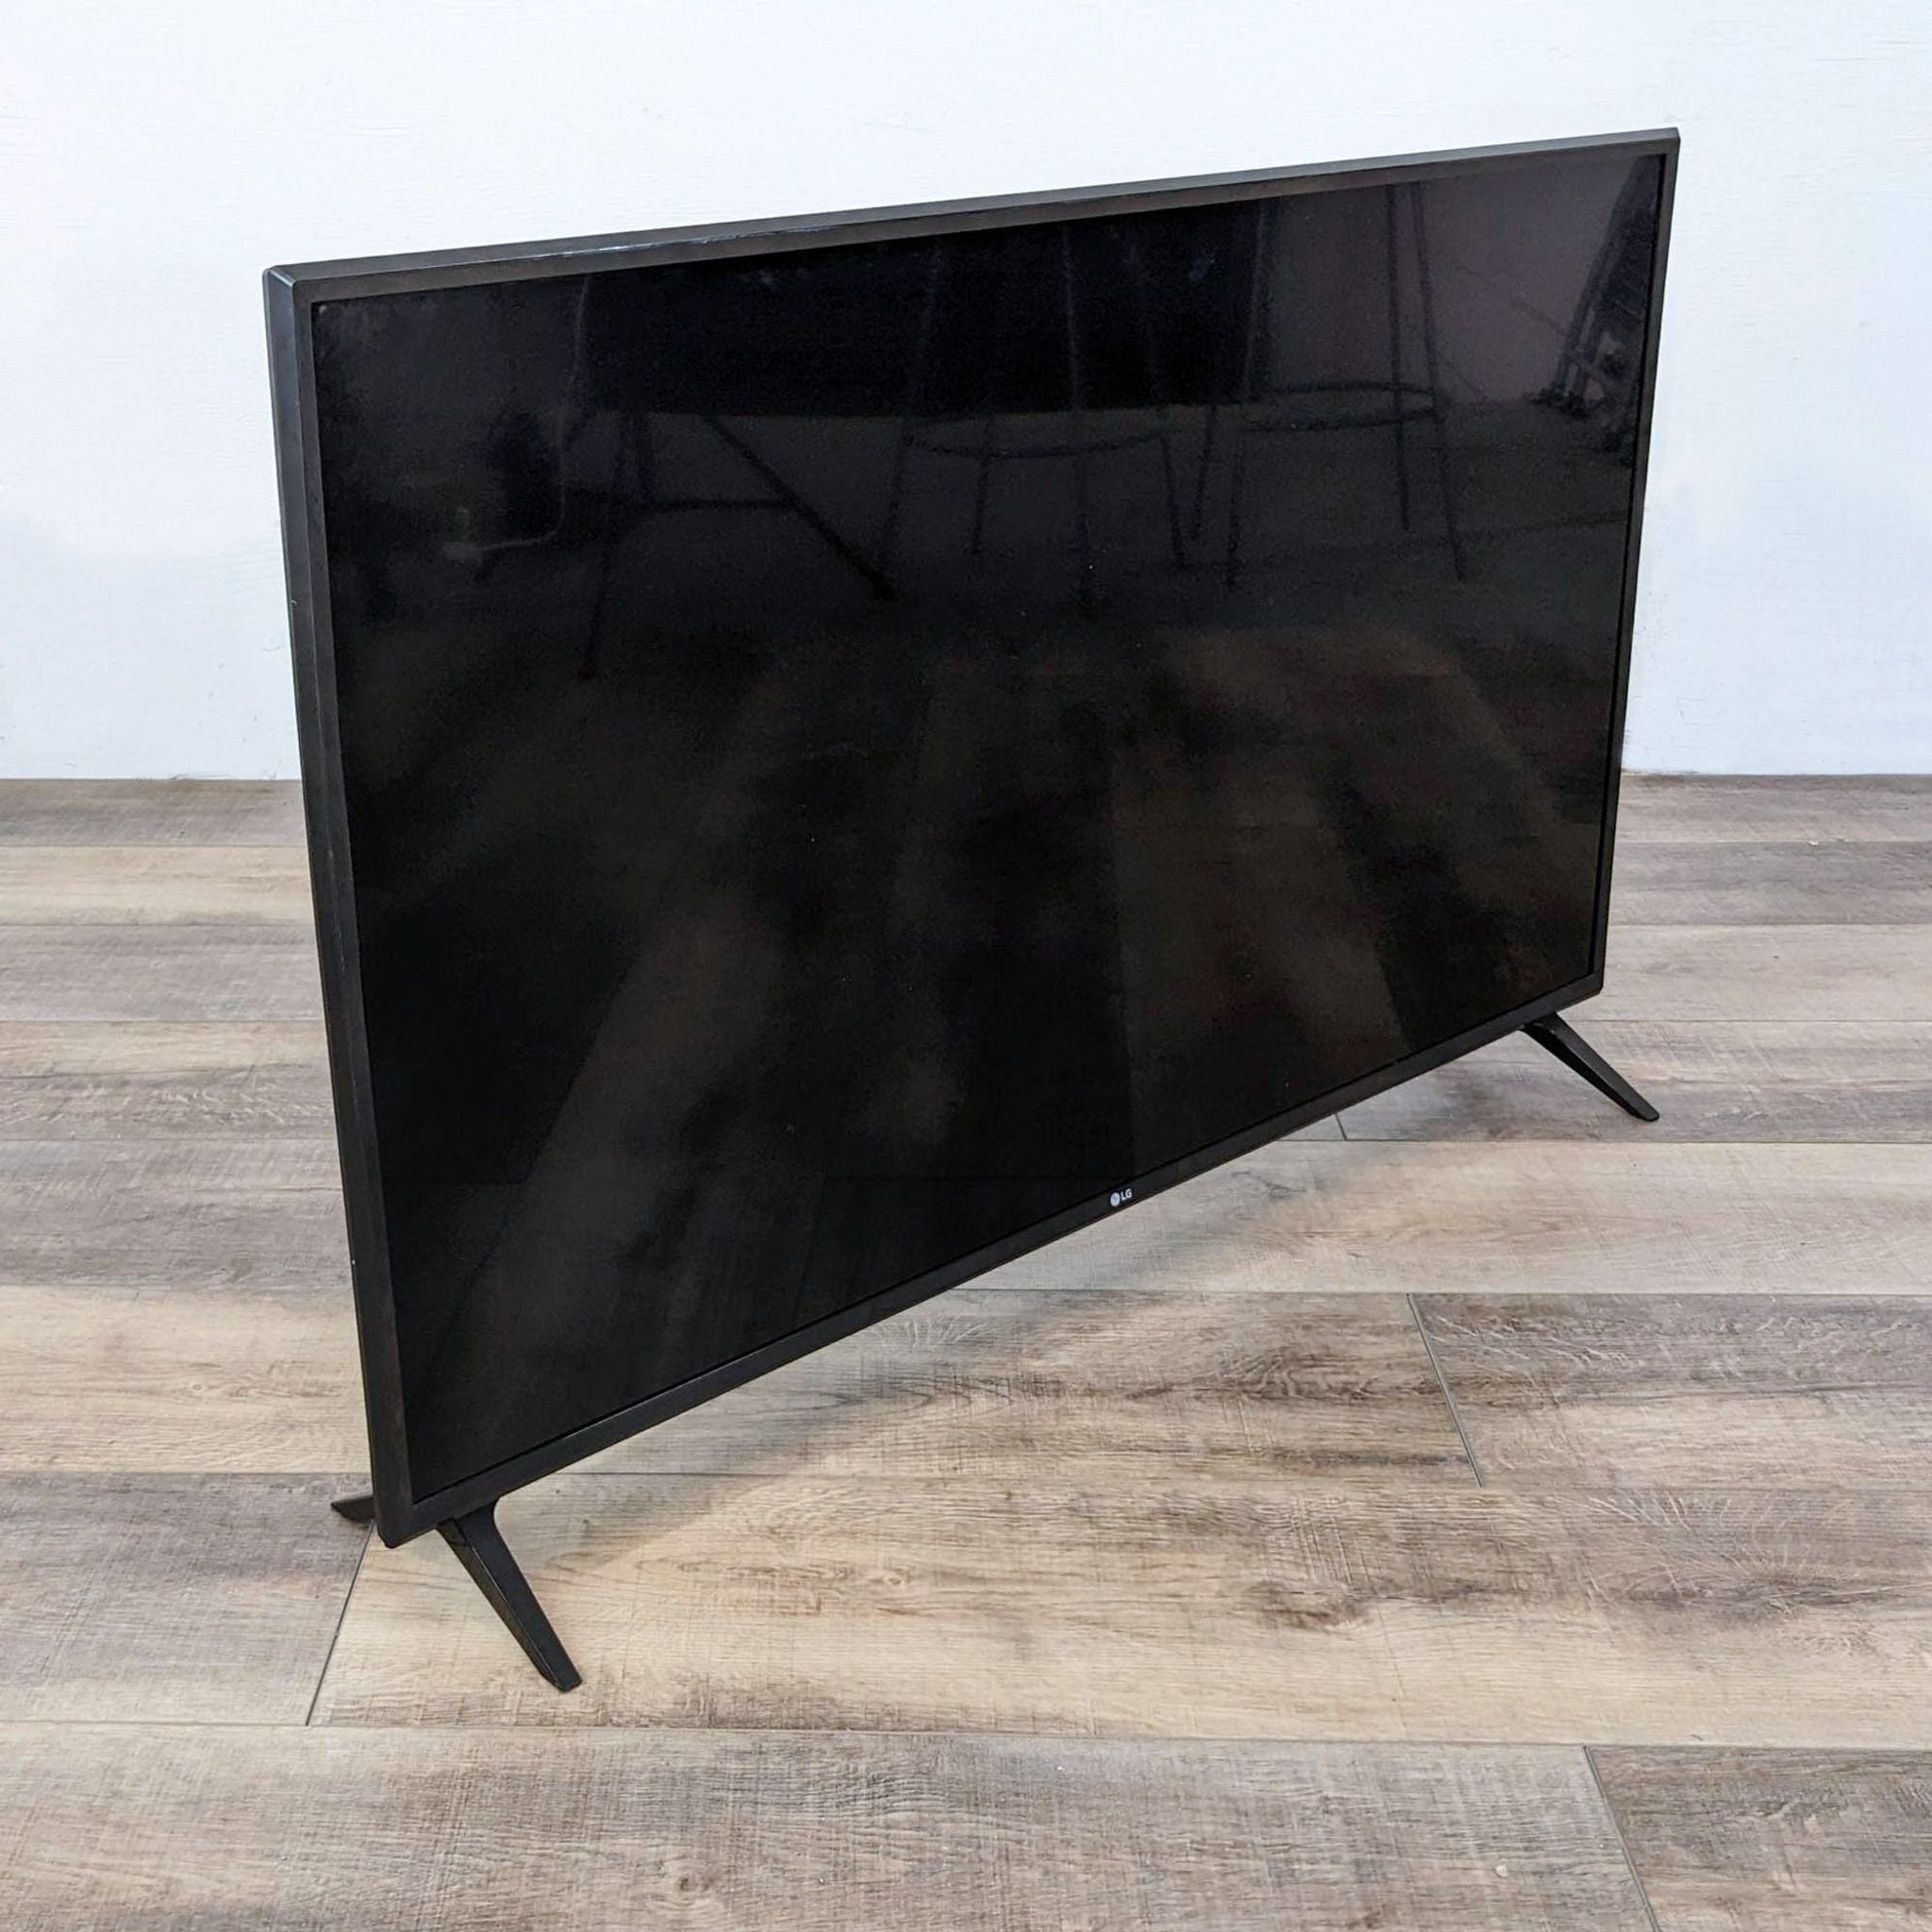 LG brand TV shown from a side angle highlighting its thin profile, on a wooden floor against a white wall.